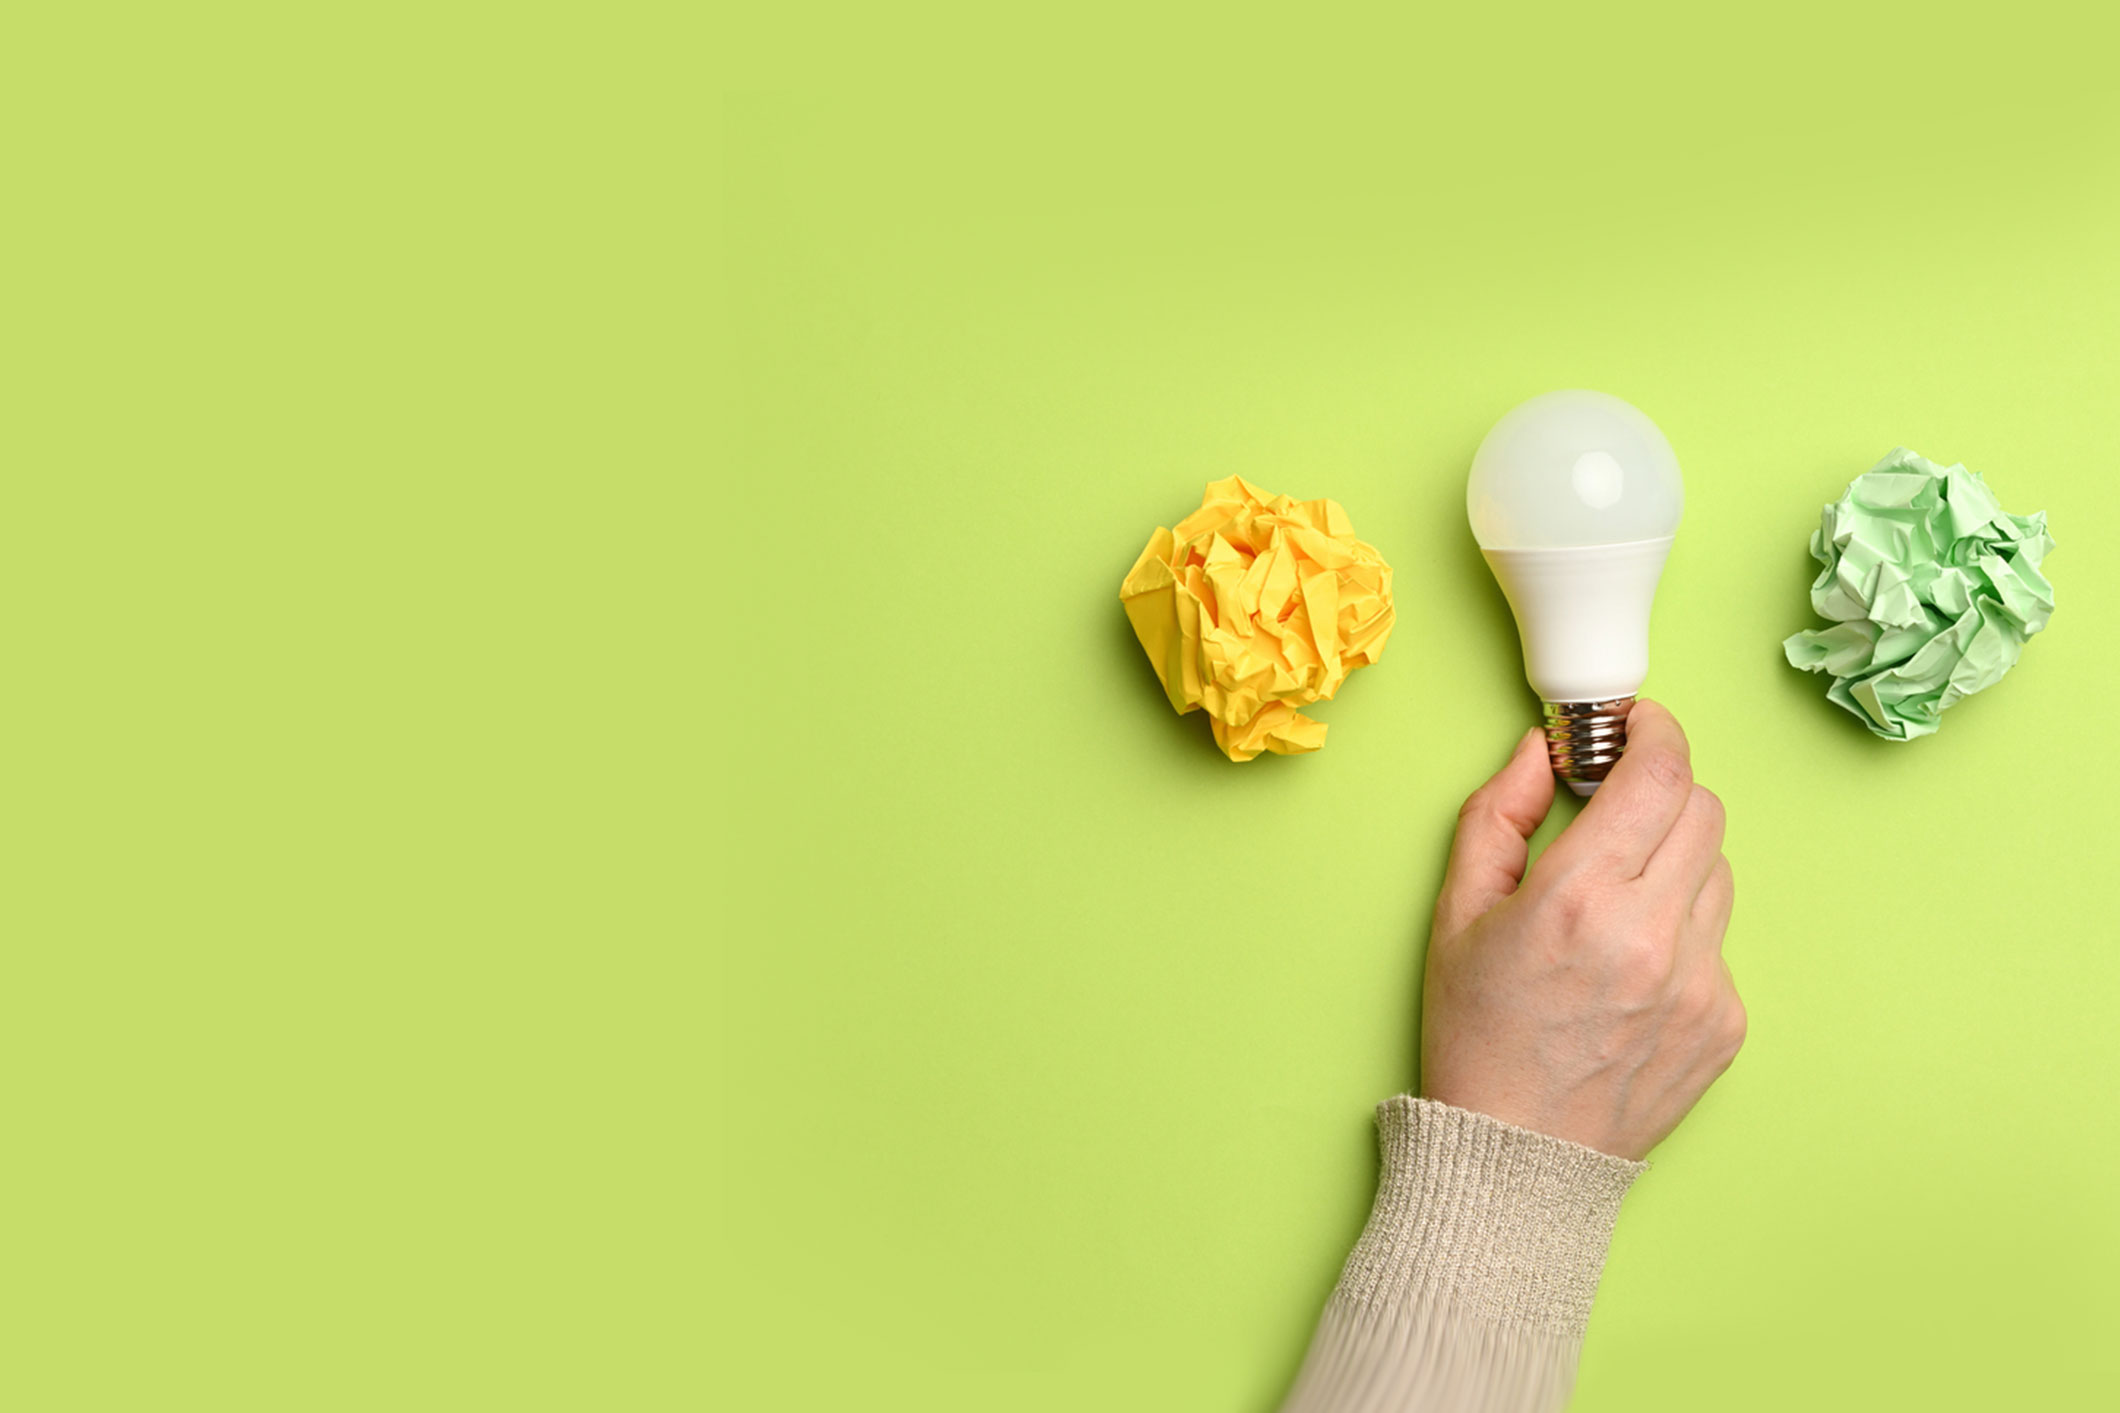 hand holding lightbulb between a crumbled piece of yellow paper and green paper - against lime green background